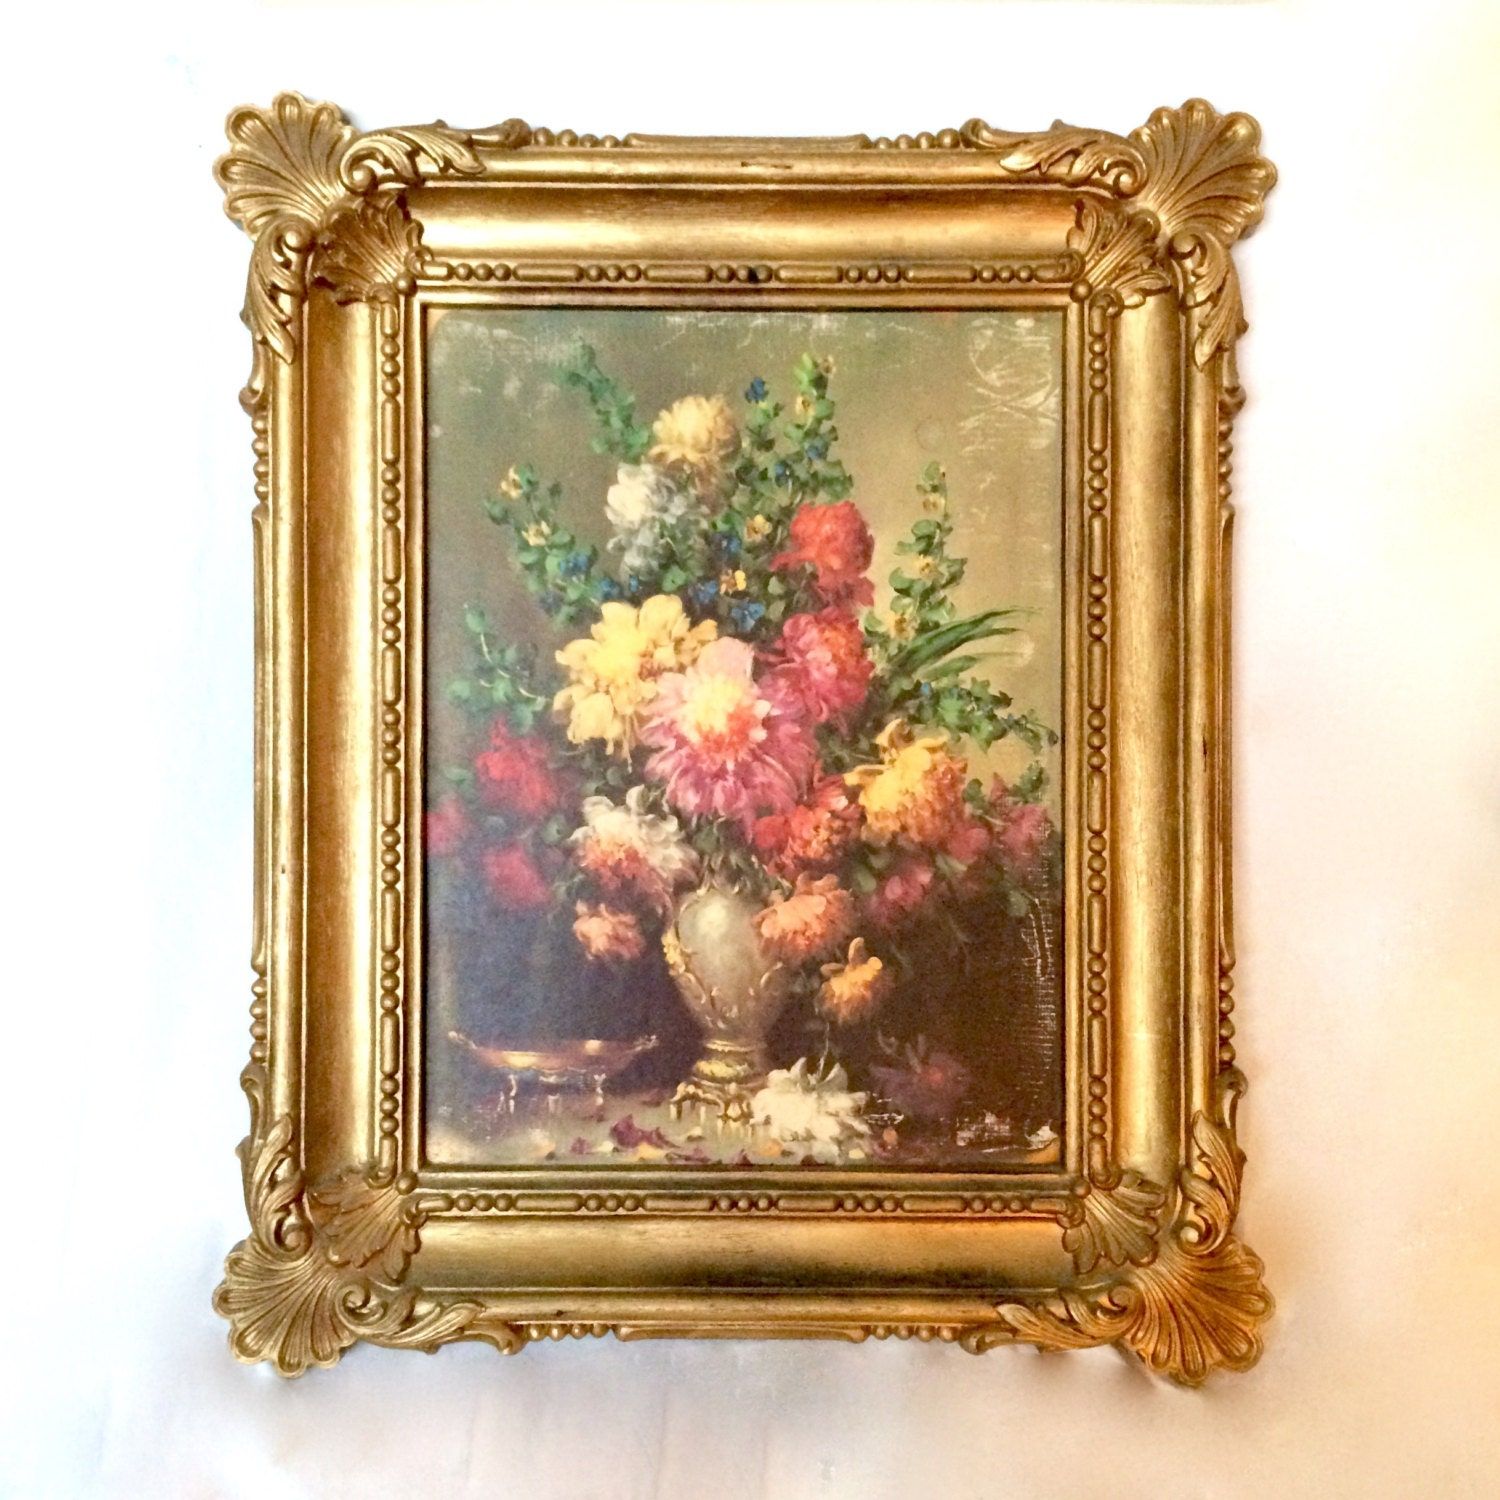 Vintage Floral Painting Print With Gold Frame / Coppercraft In Best And Newest Flower Framed Art Prints (View 18 of 20)